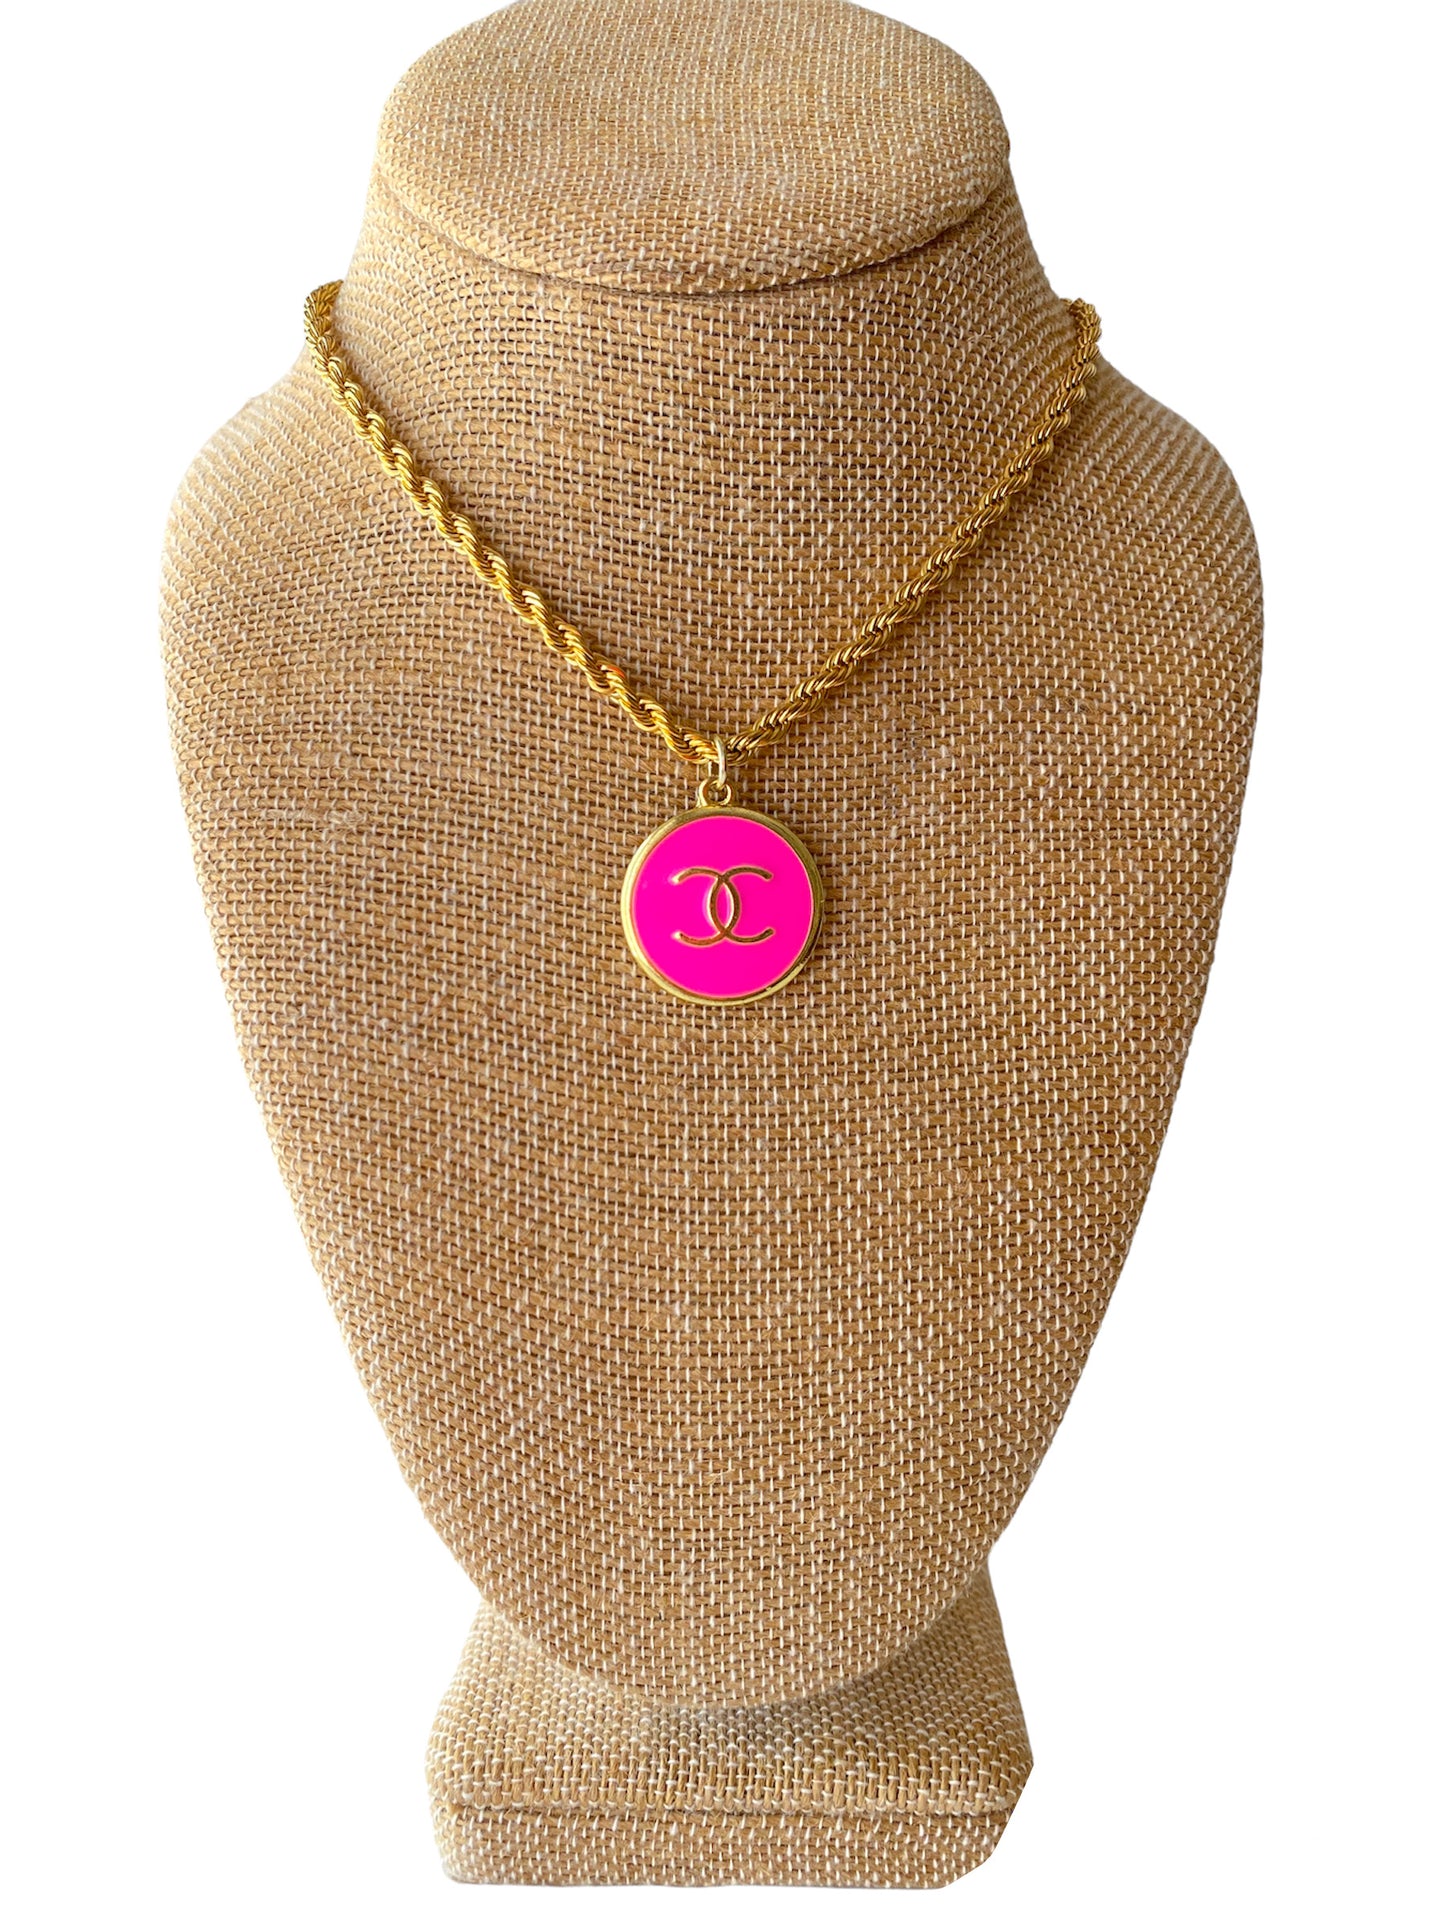 Pink CC Coin Necklace